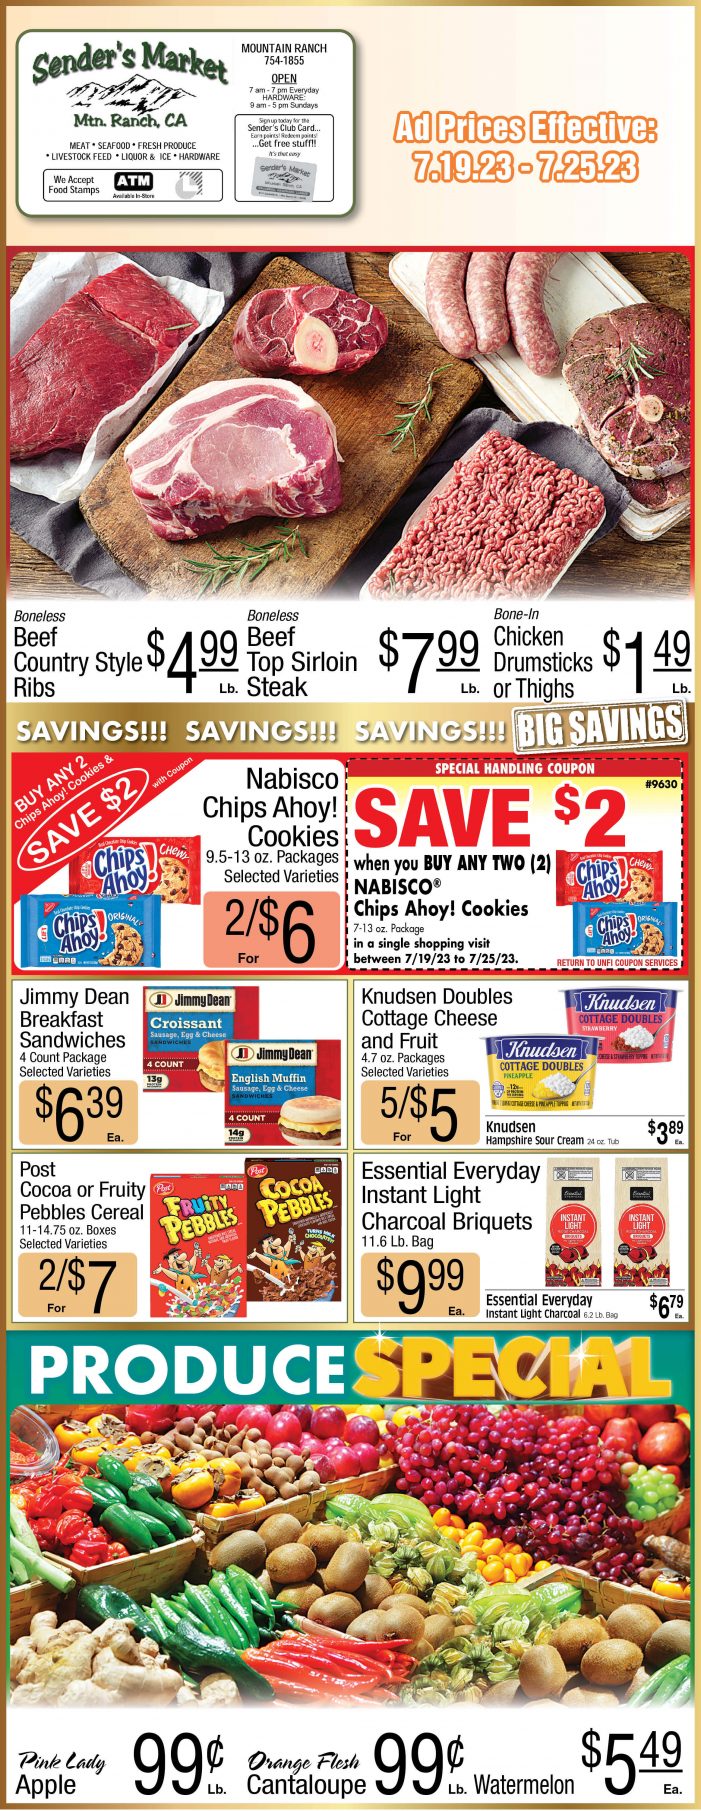 Sender’s Market Weekly Ad & Grocery Specials Through July 25th! Shop Local & Save!!